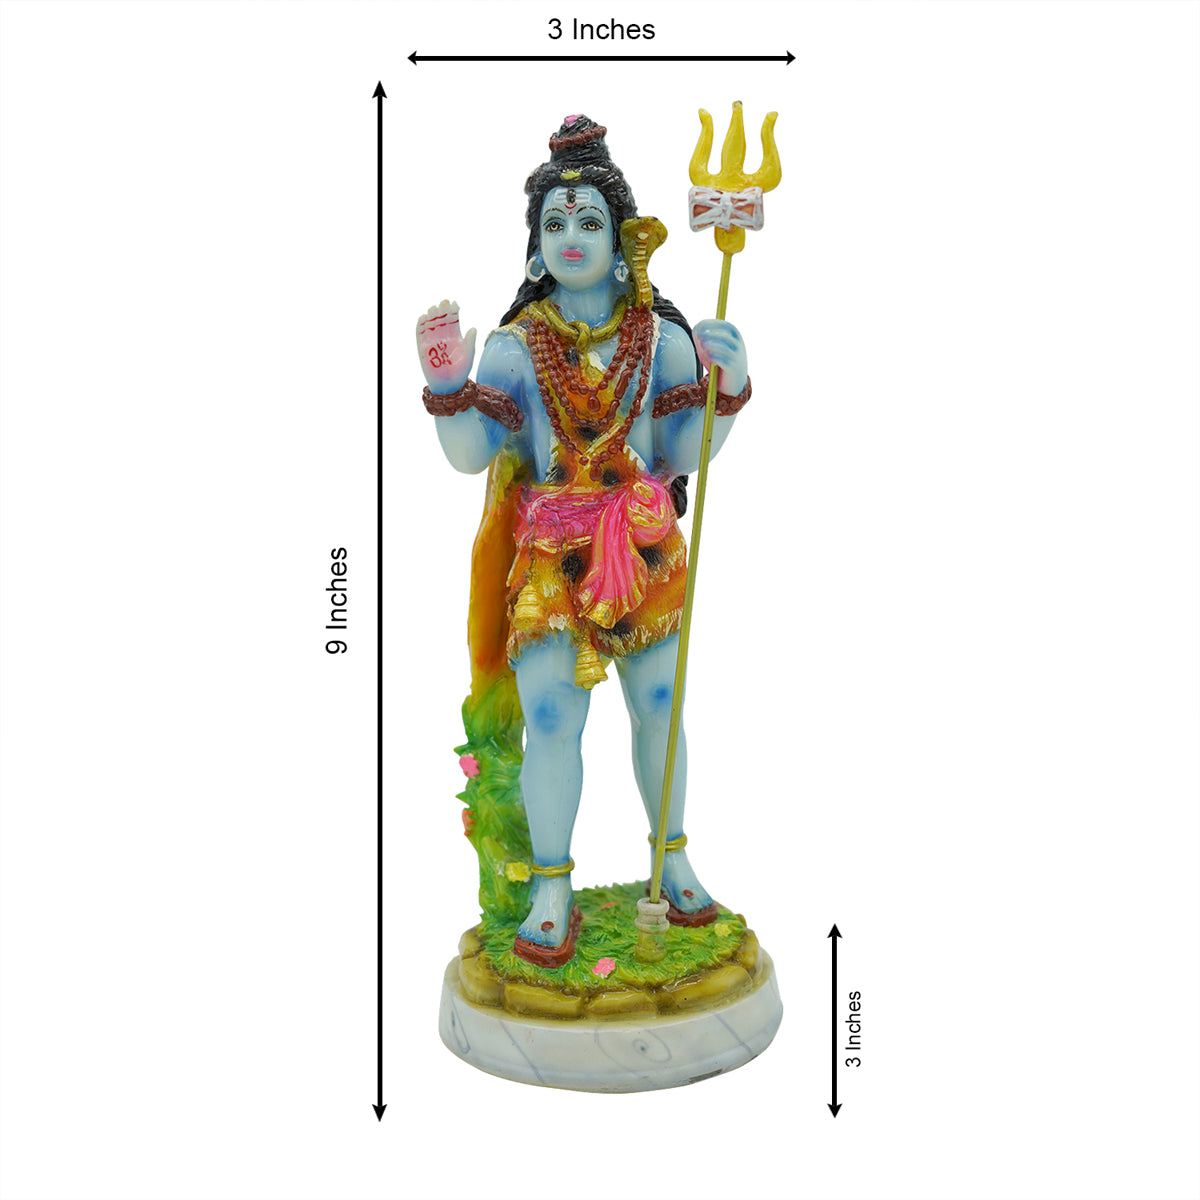 Hand painted Lord Shiv Ji Idol For Home Decoration (3x3x9) – Gallery99